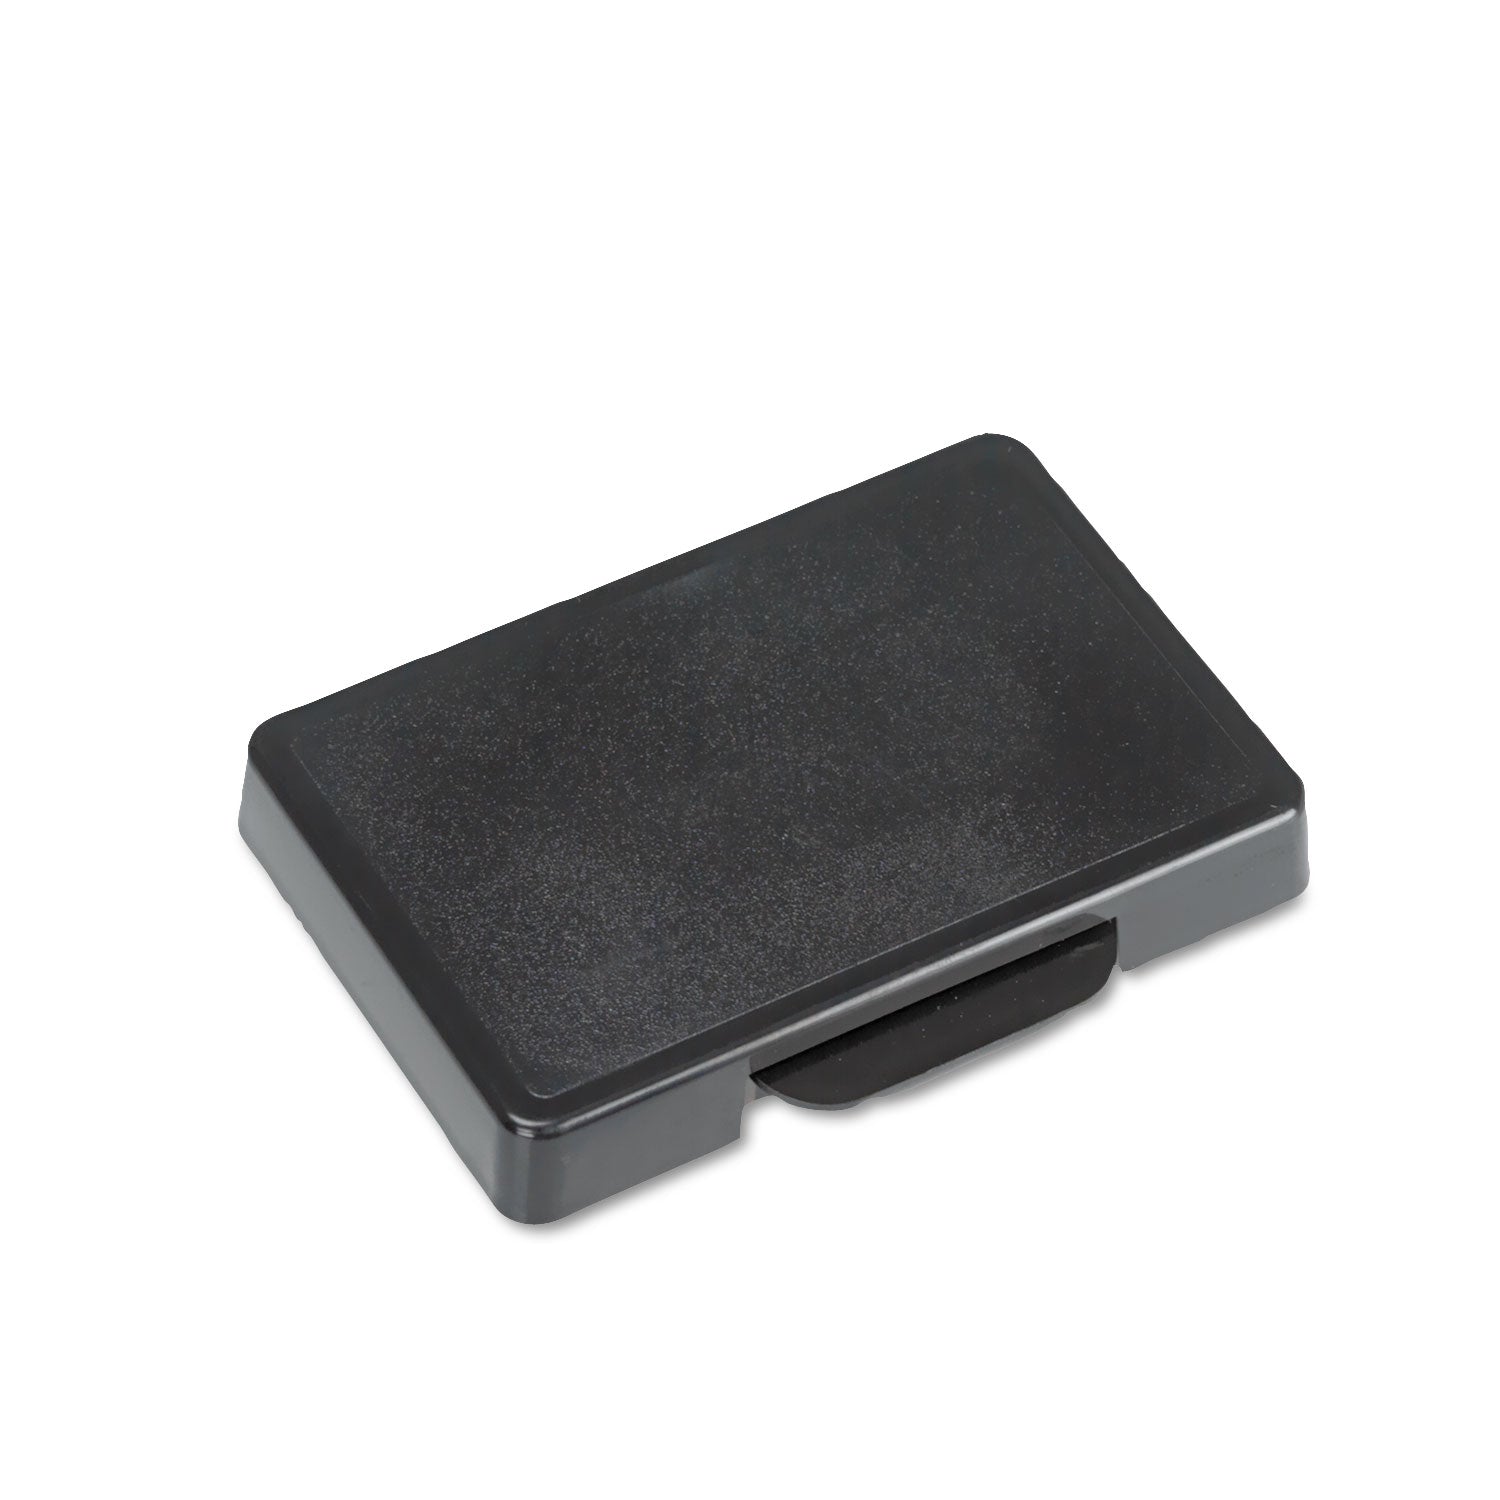 T5460 Professional Replacement Ink Pad for Trodat Custom Self-Inking Stamps, 1.38" x 2.38", Black - 